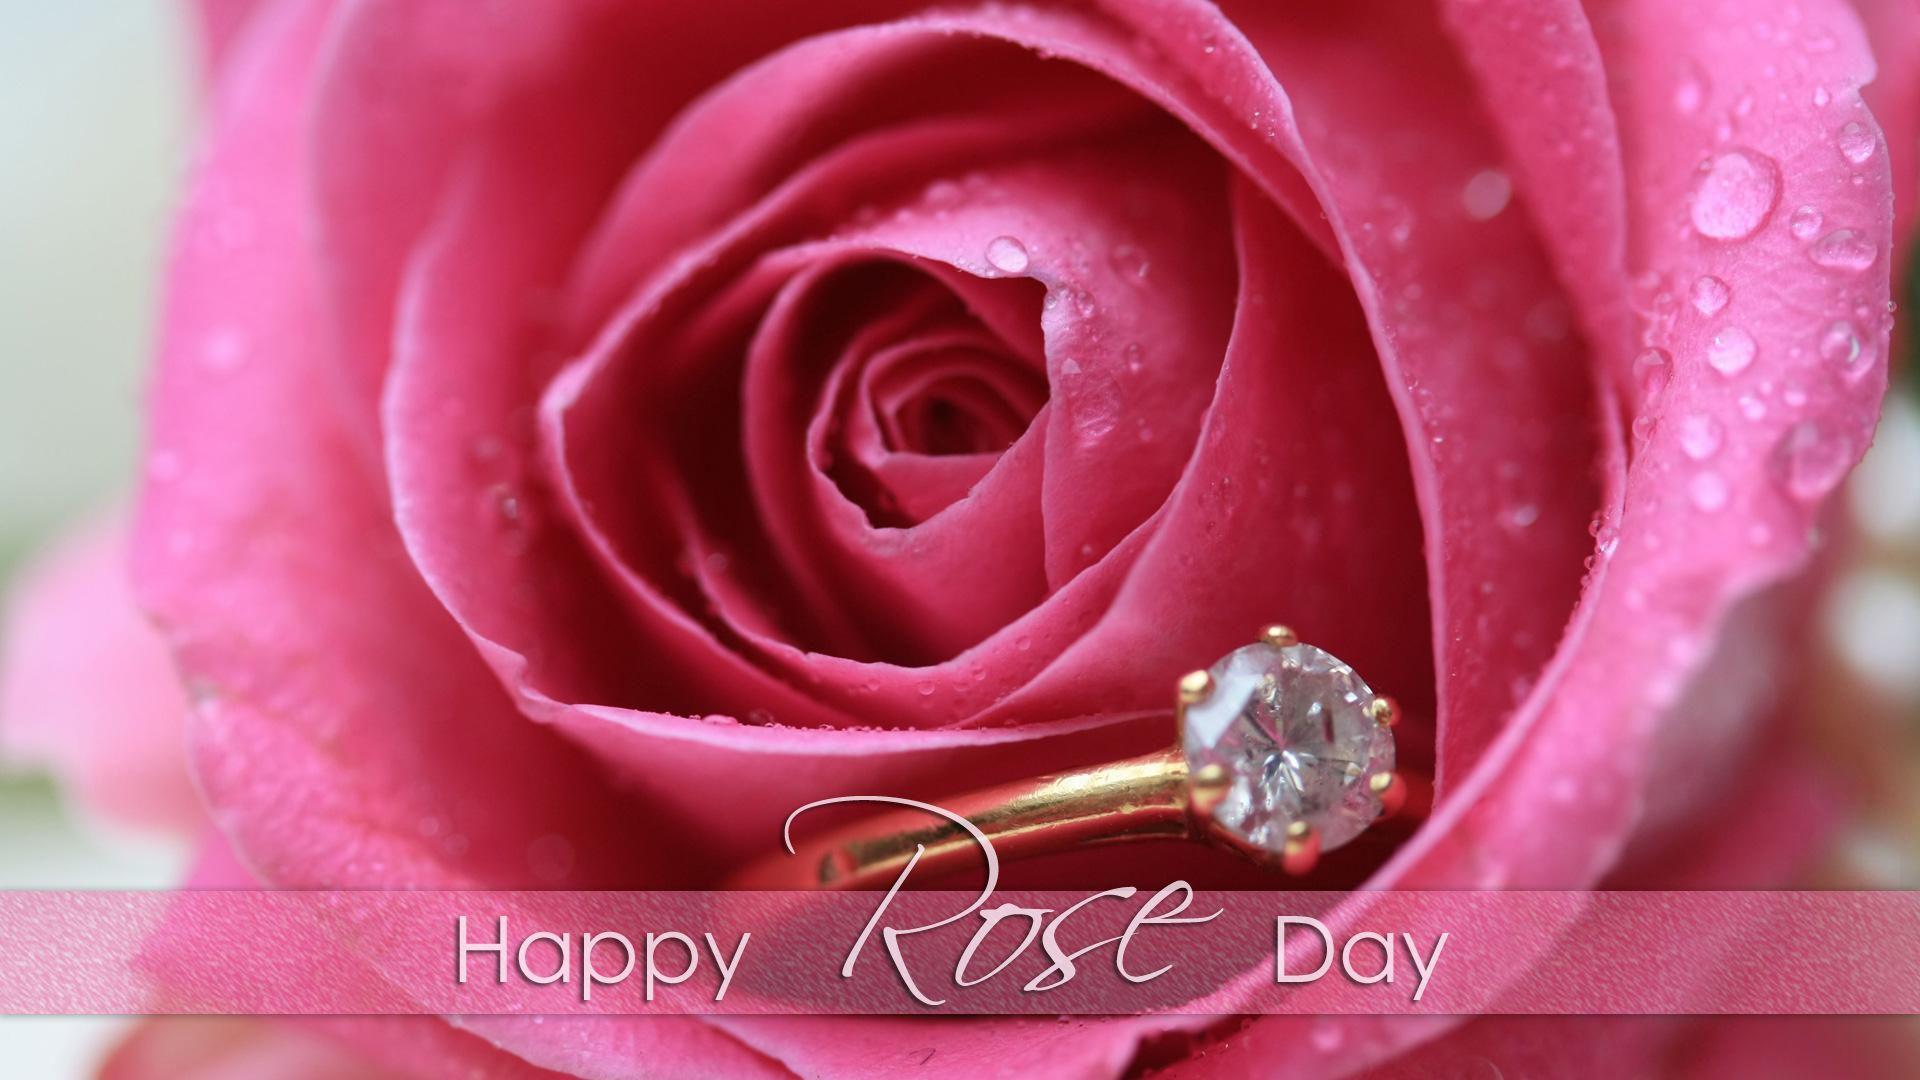 Rose Day Image for Whatsapp DP, Profile Wallpaper